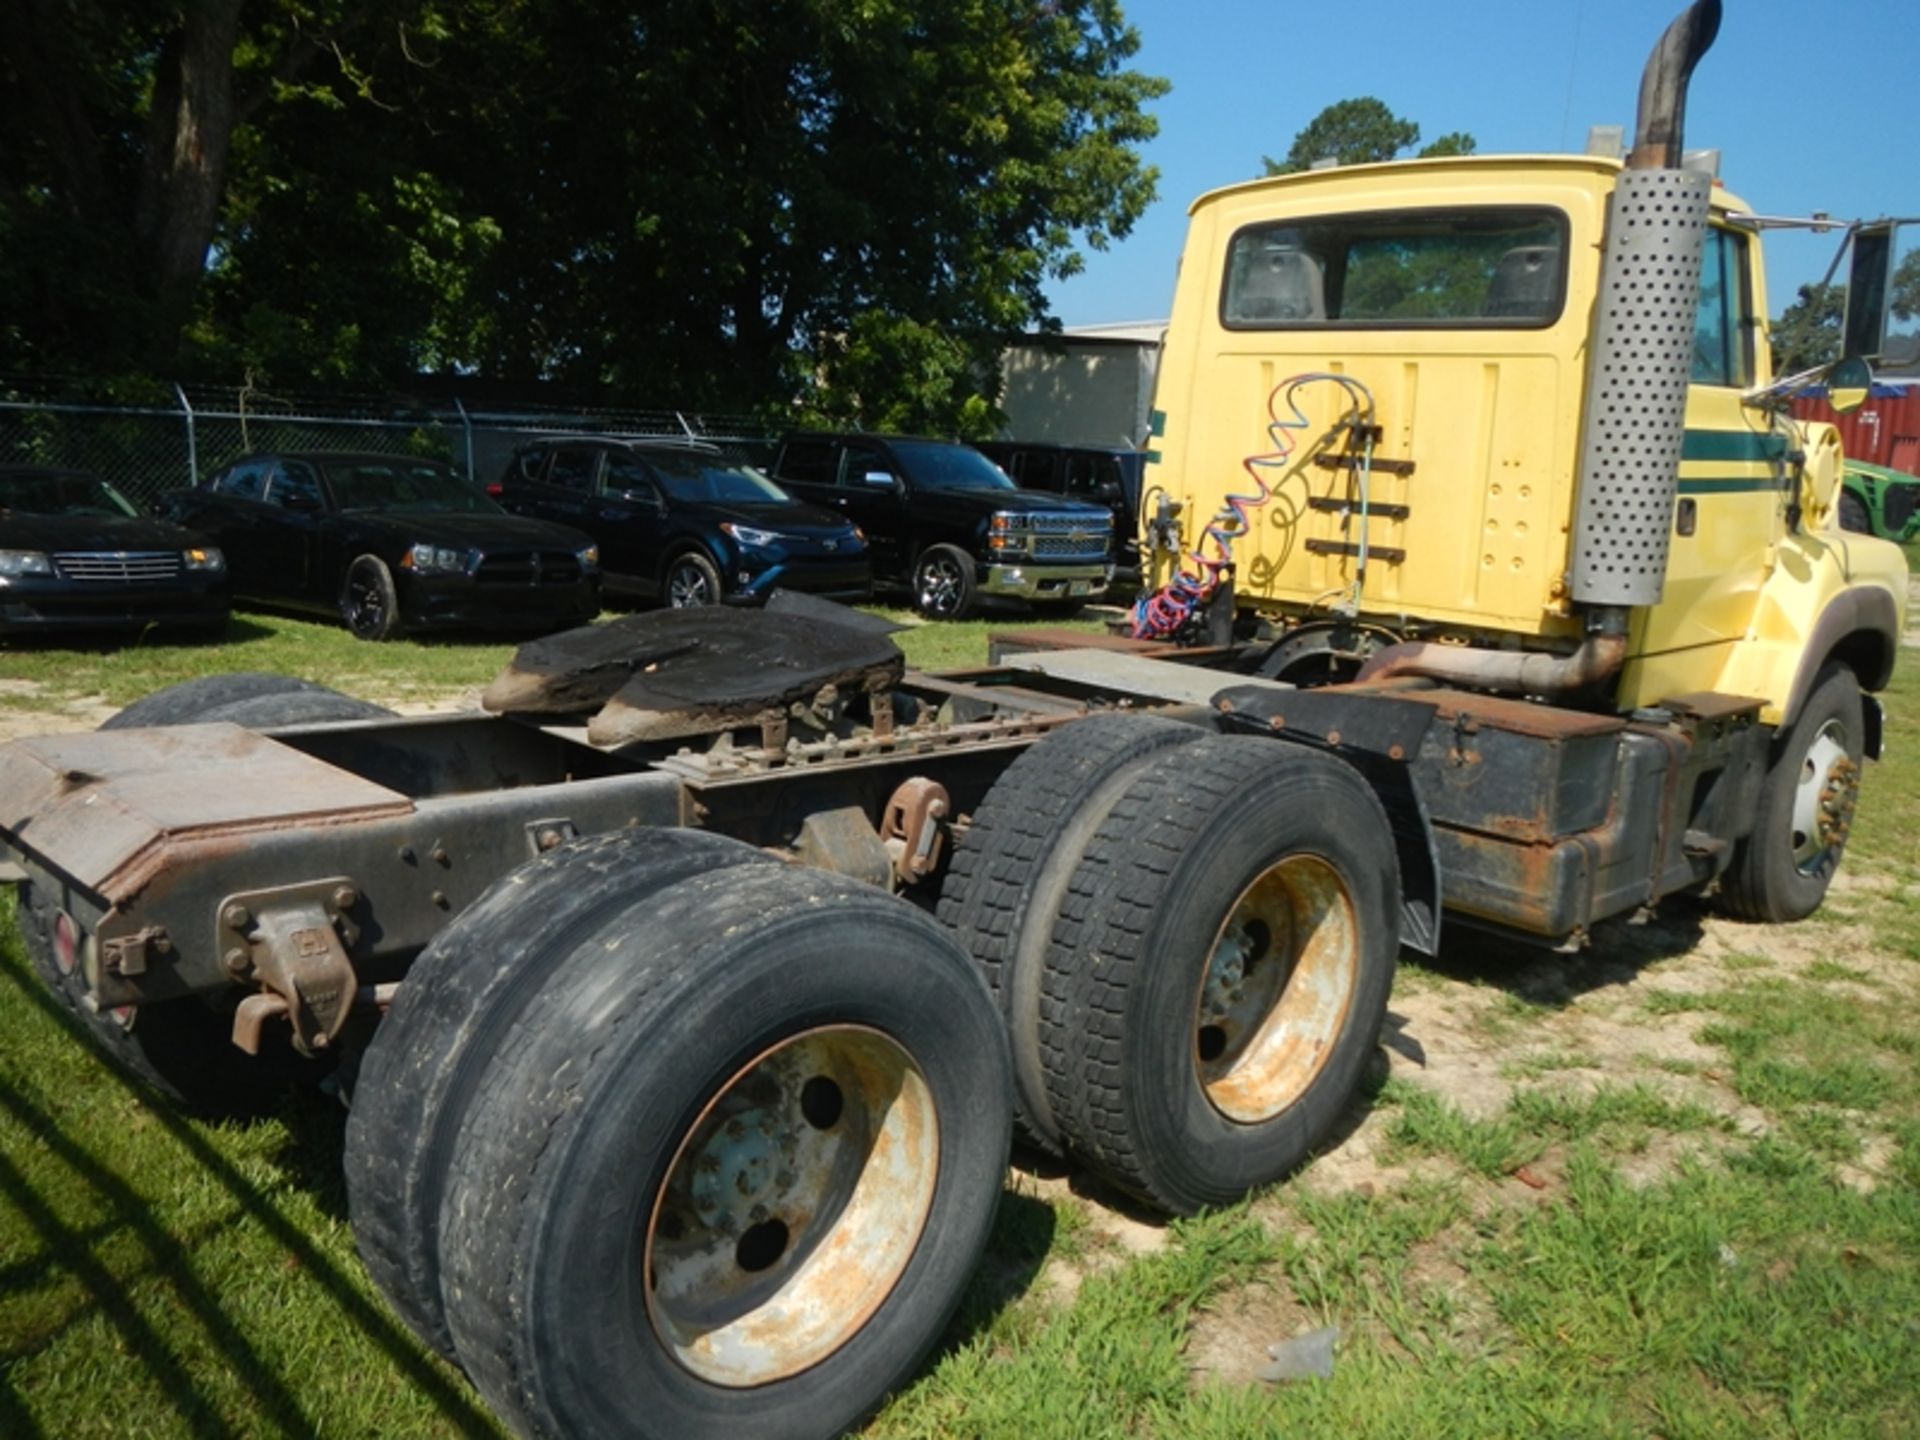 1994 FORD Aeromax L9000 day cab road tractor VIN 1FDYY95XXRVA27658 - Image 3 of 5